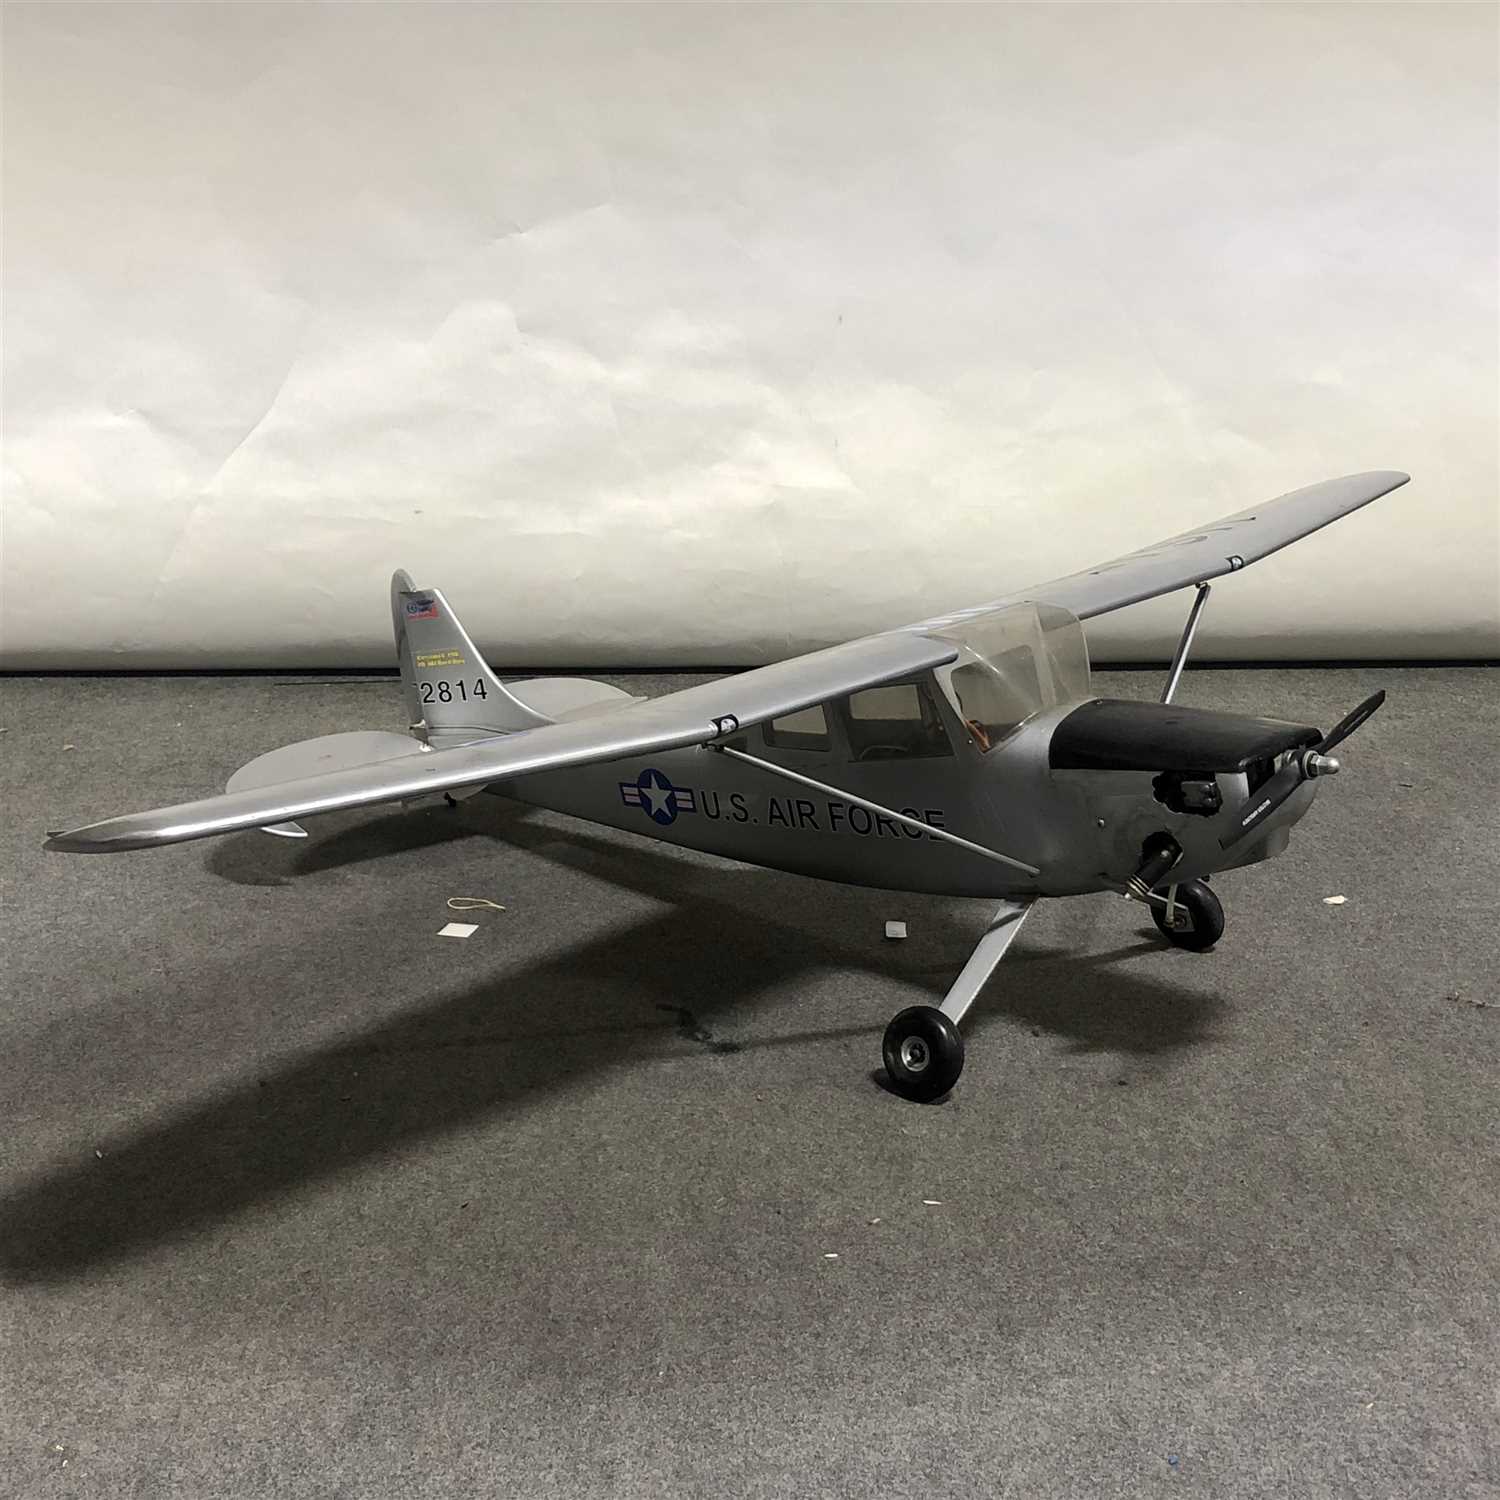 Lot 86 - 72" Span USAF Scale model with 2.4cc radio and FS engine and model stand.